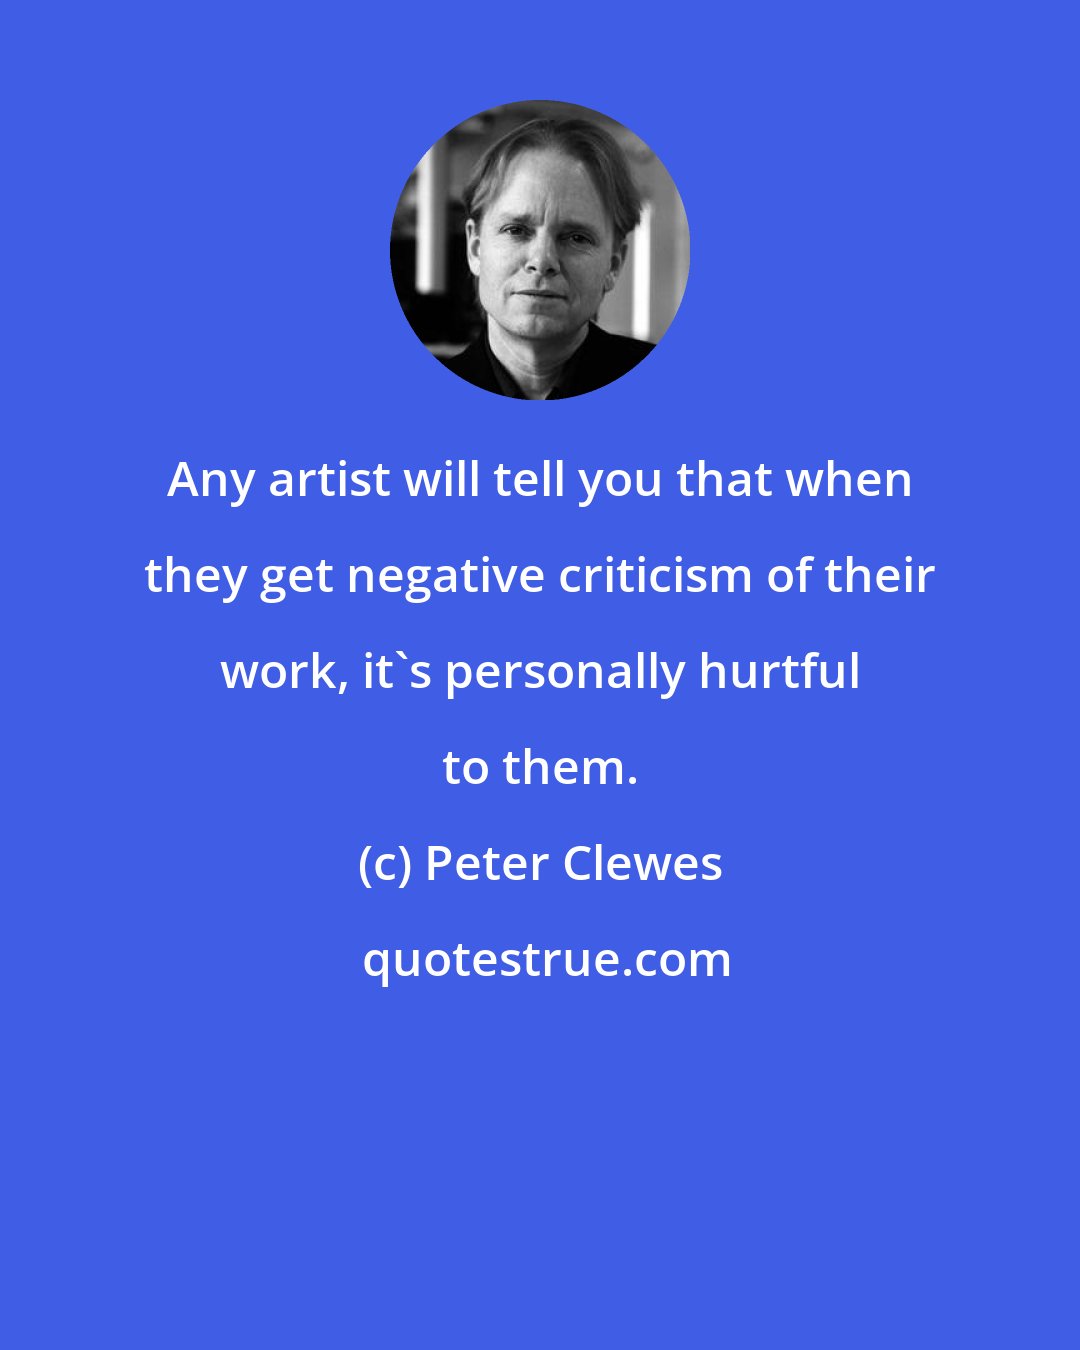 Peter Clewes: Any artist will tell you that when they get negative criticism of their work, it's personally hurtful to them.